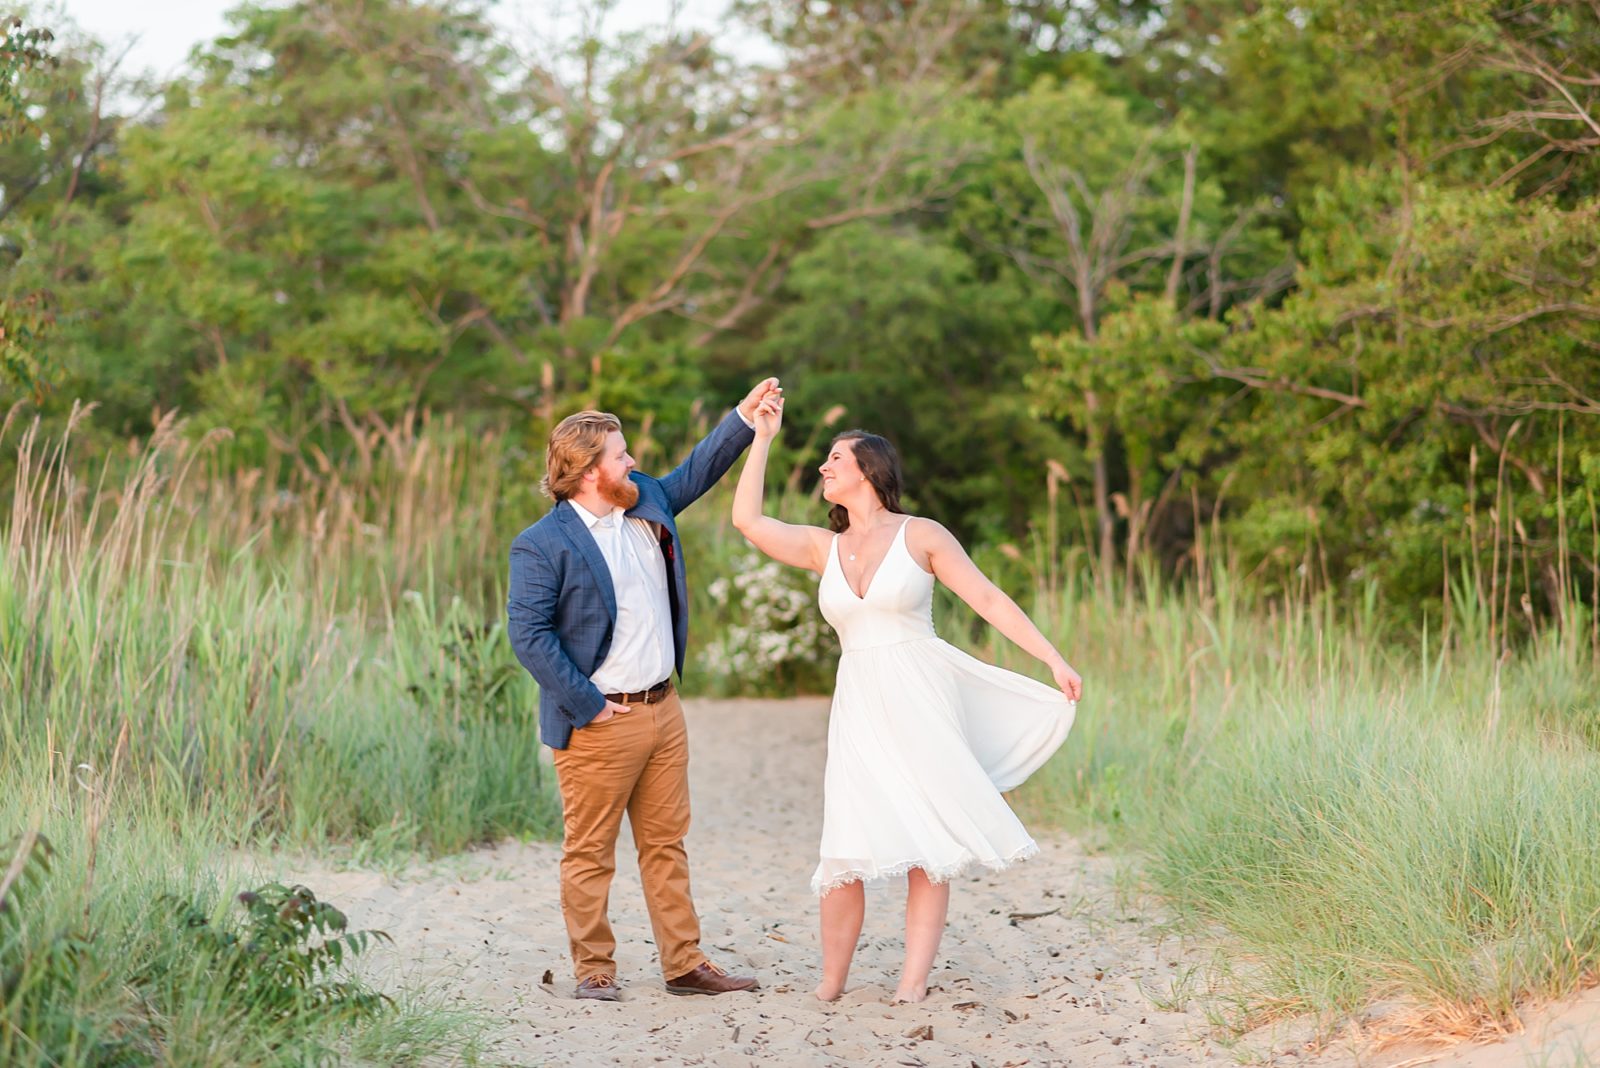 groom in blue suit jacket twirls bride in white dress during engagement photos 